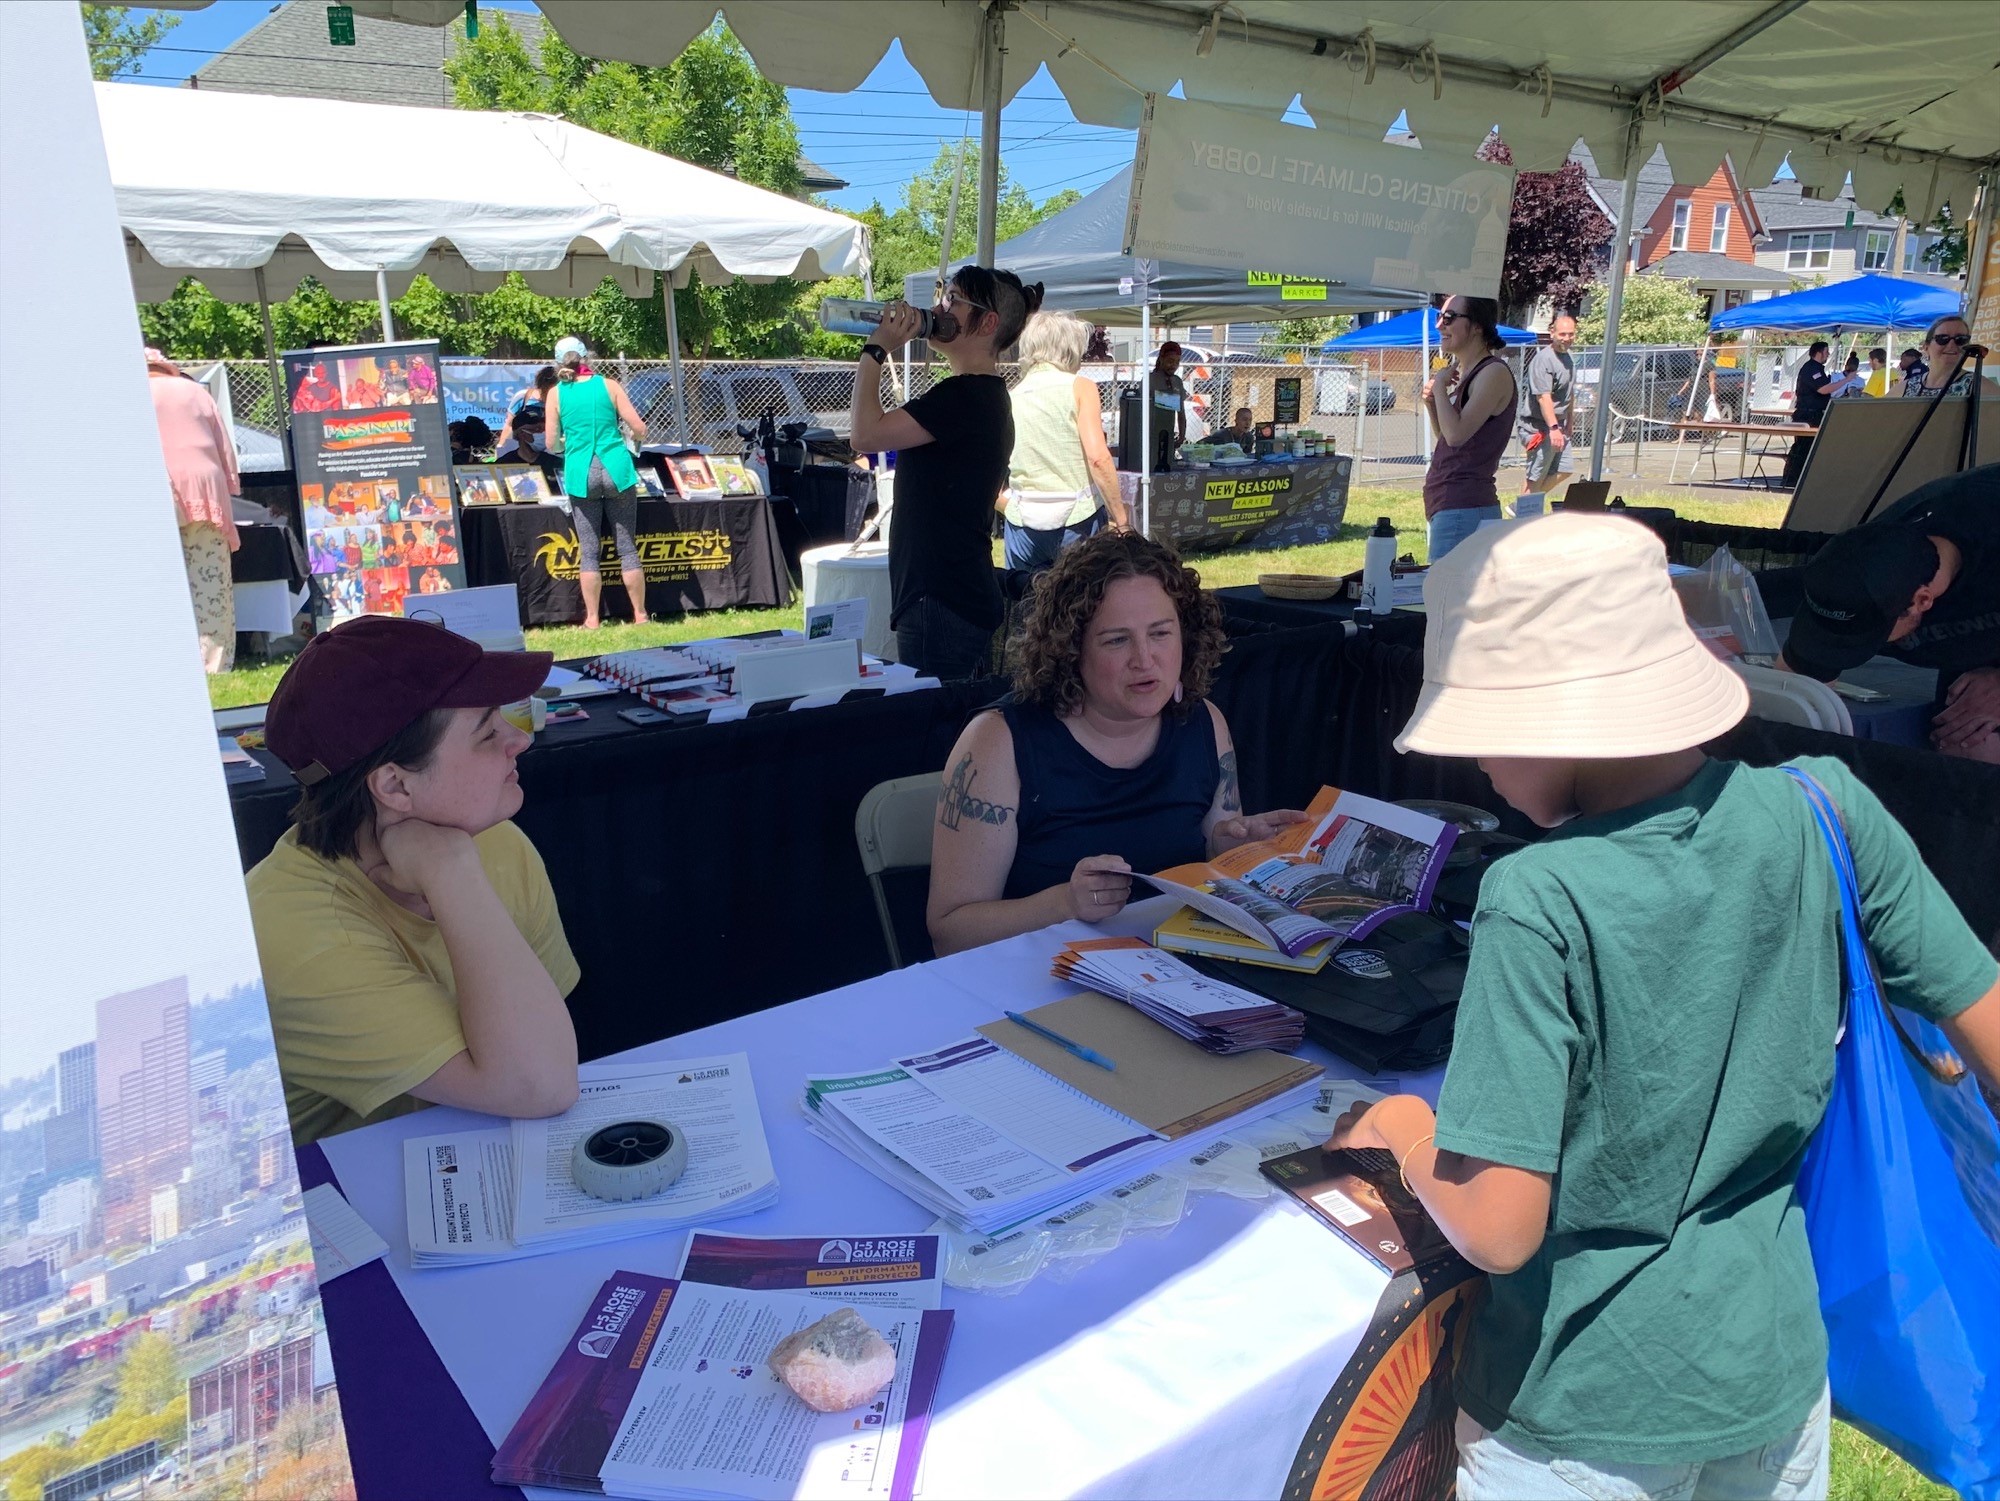 Two staff members sitting behind a table, pointing to materials on the table while in a discussion with a festival attendee.